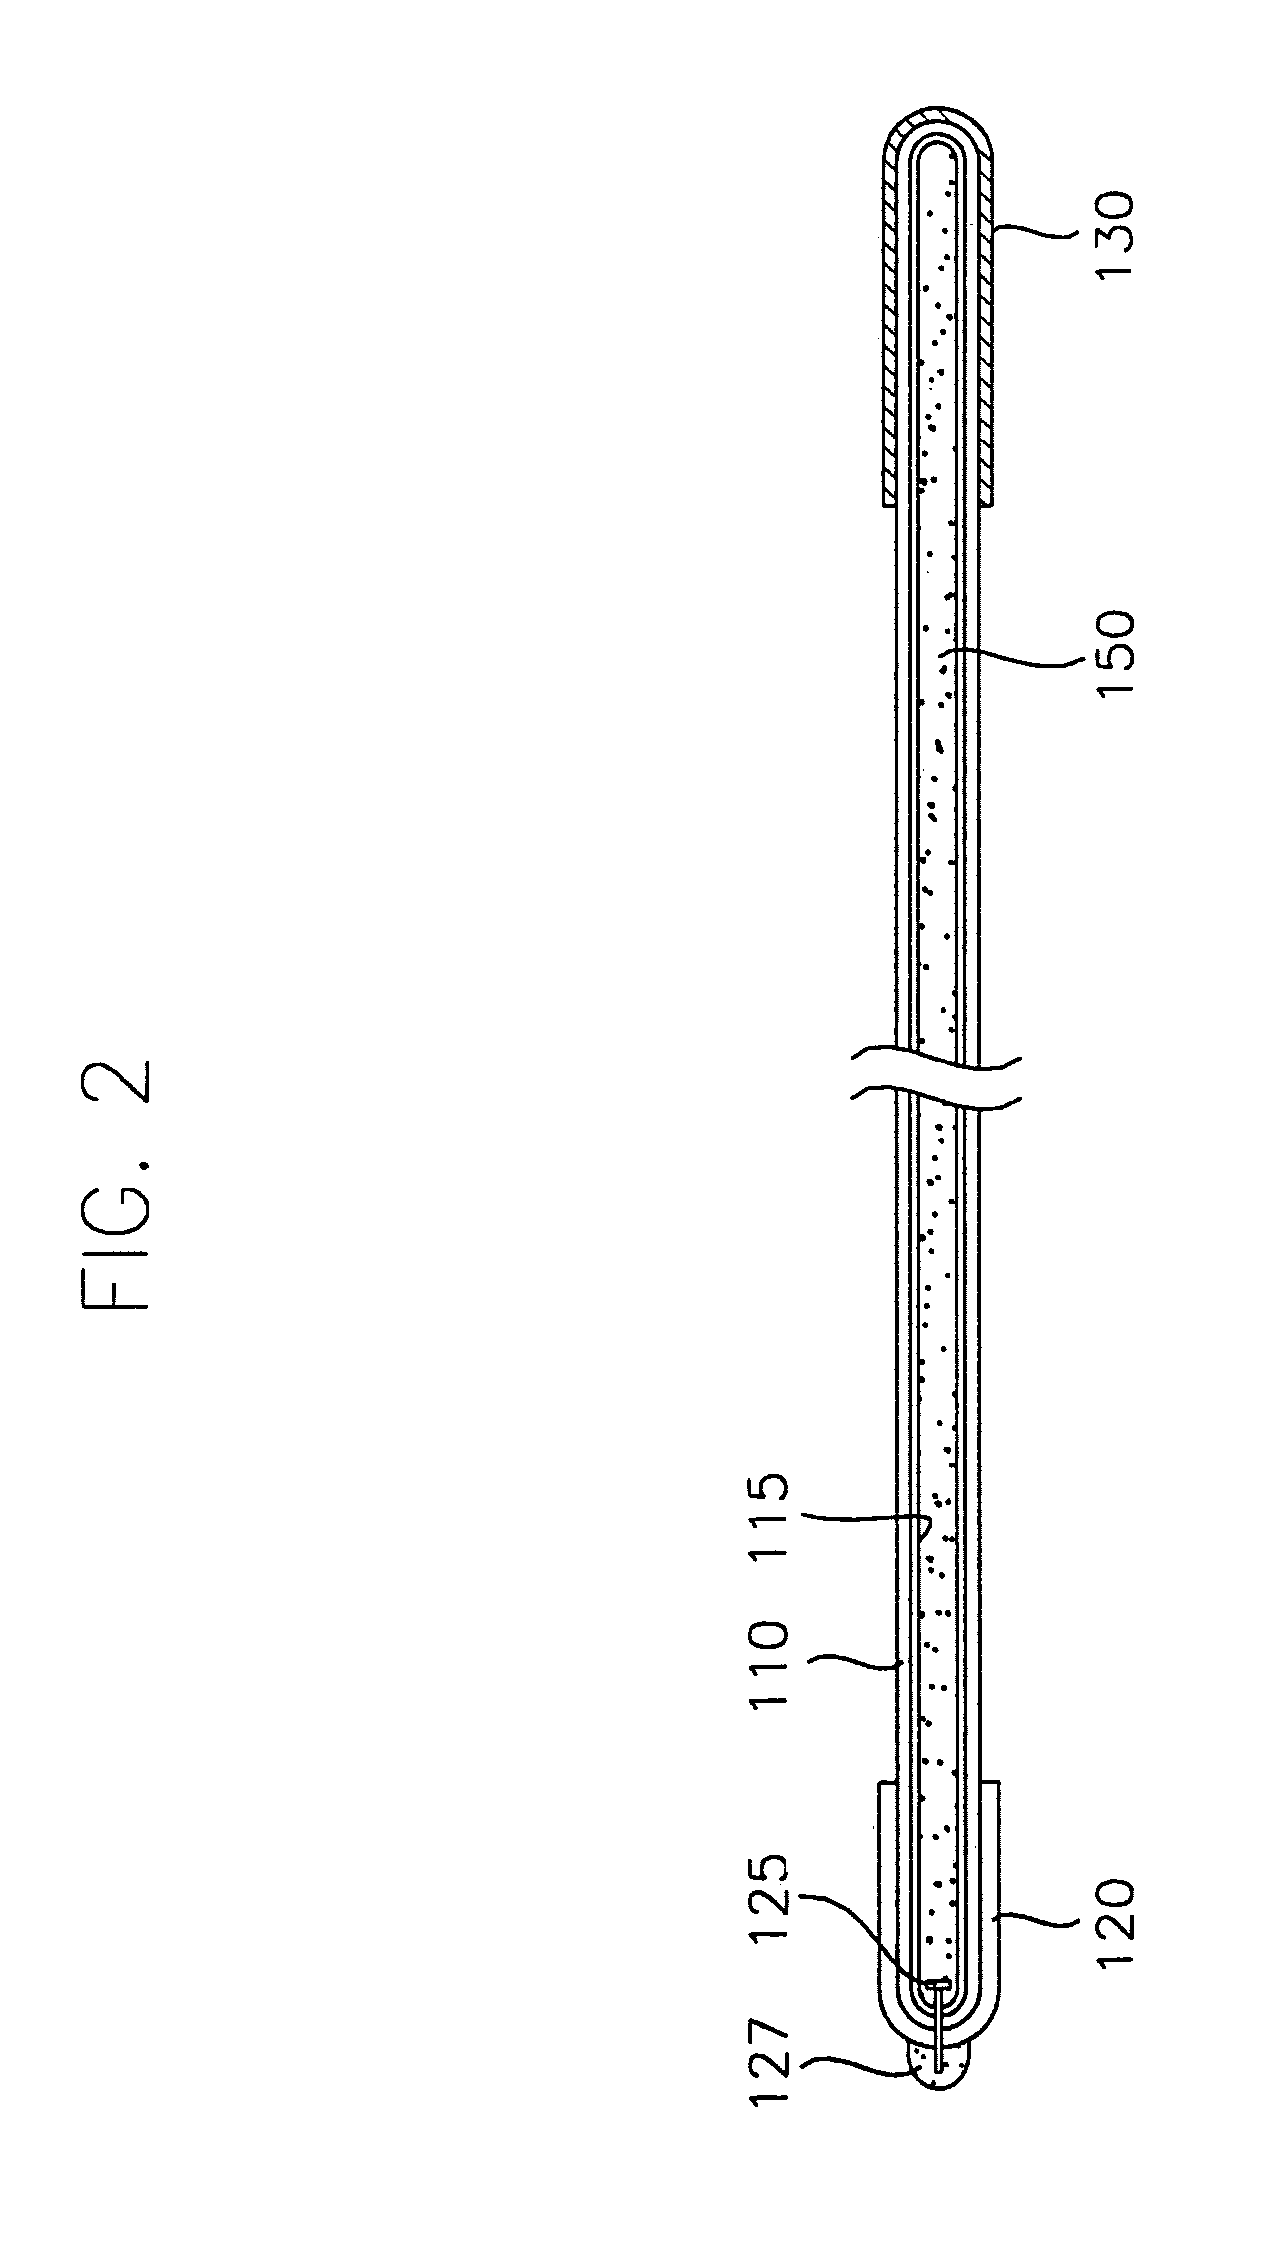 Liquid crystal display device including a cold cathode fluorescent lamp and a container for receiving the same